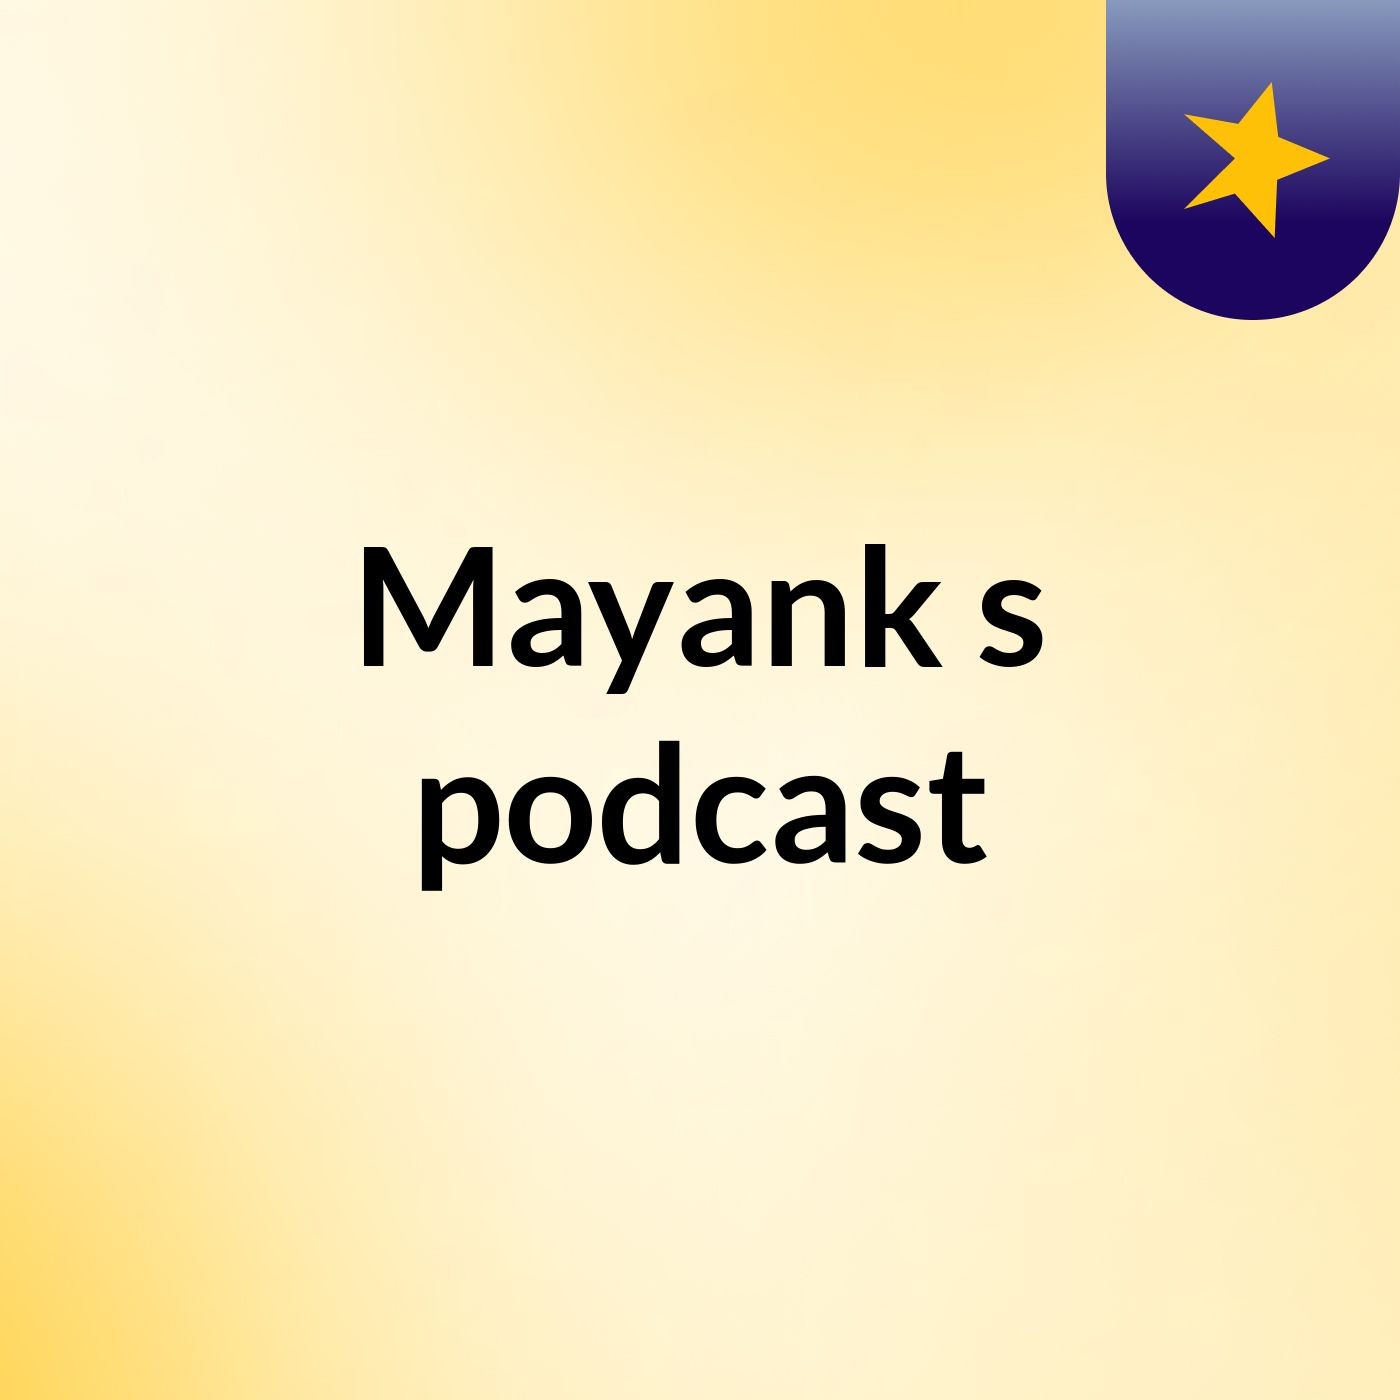 Episode 4 - Mayank's podcast